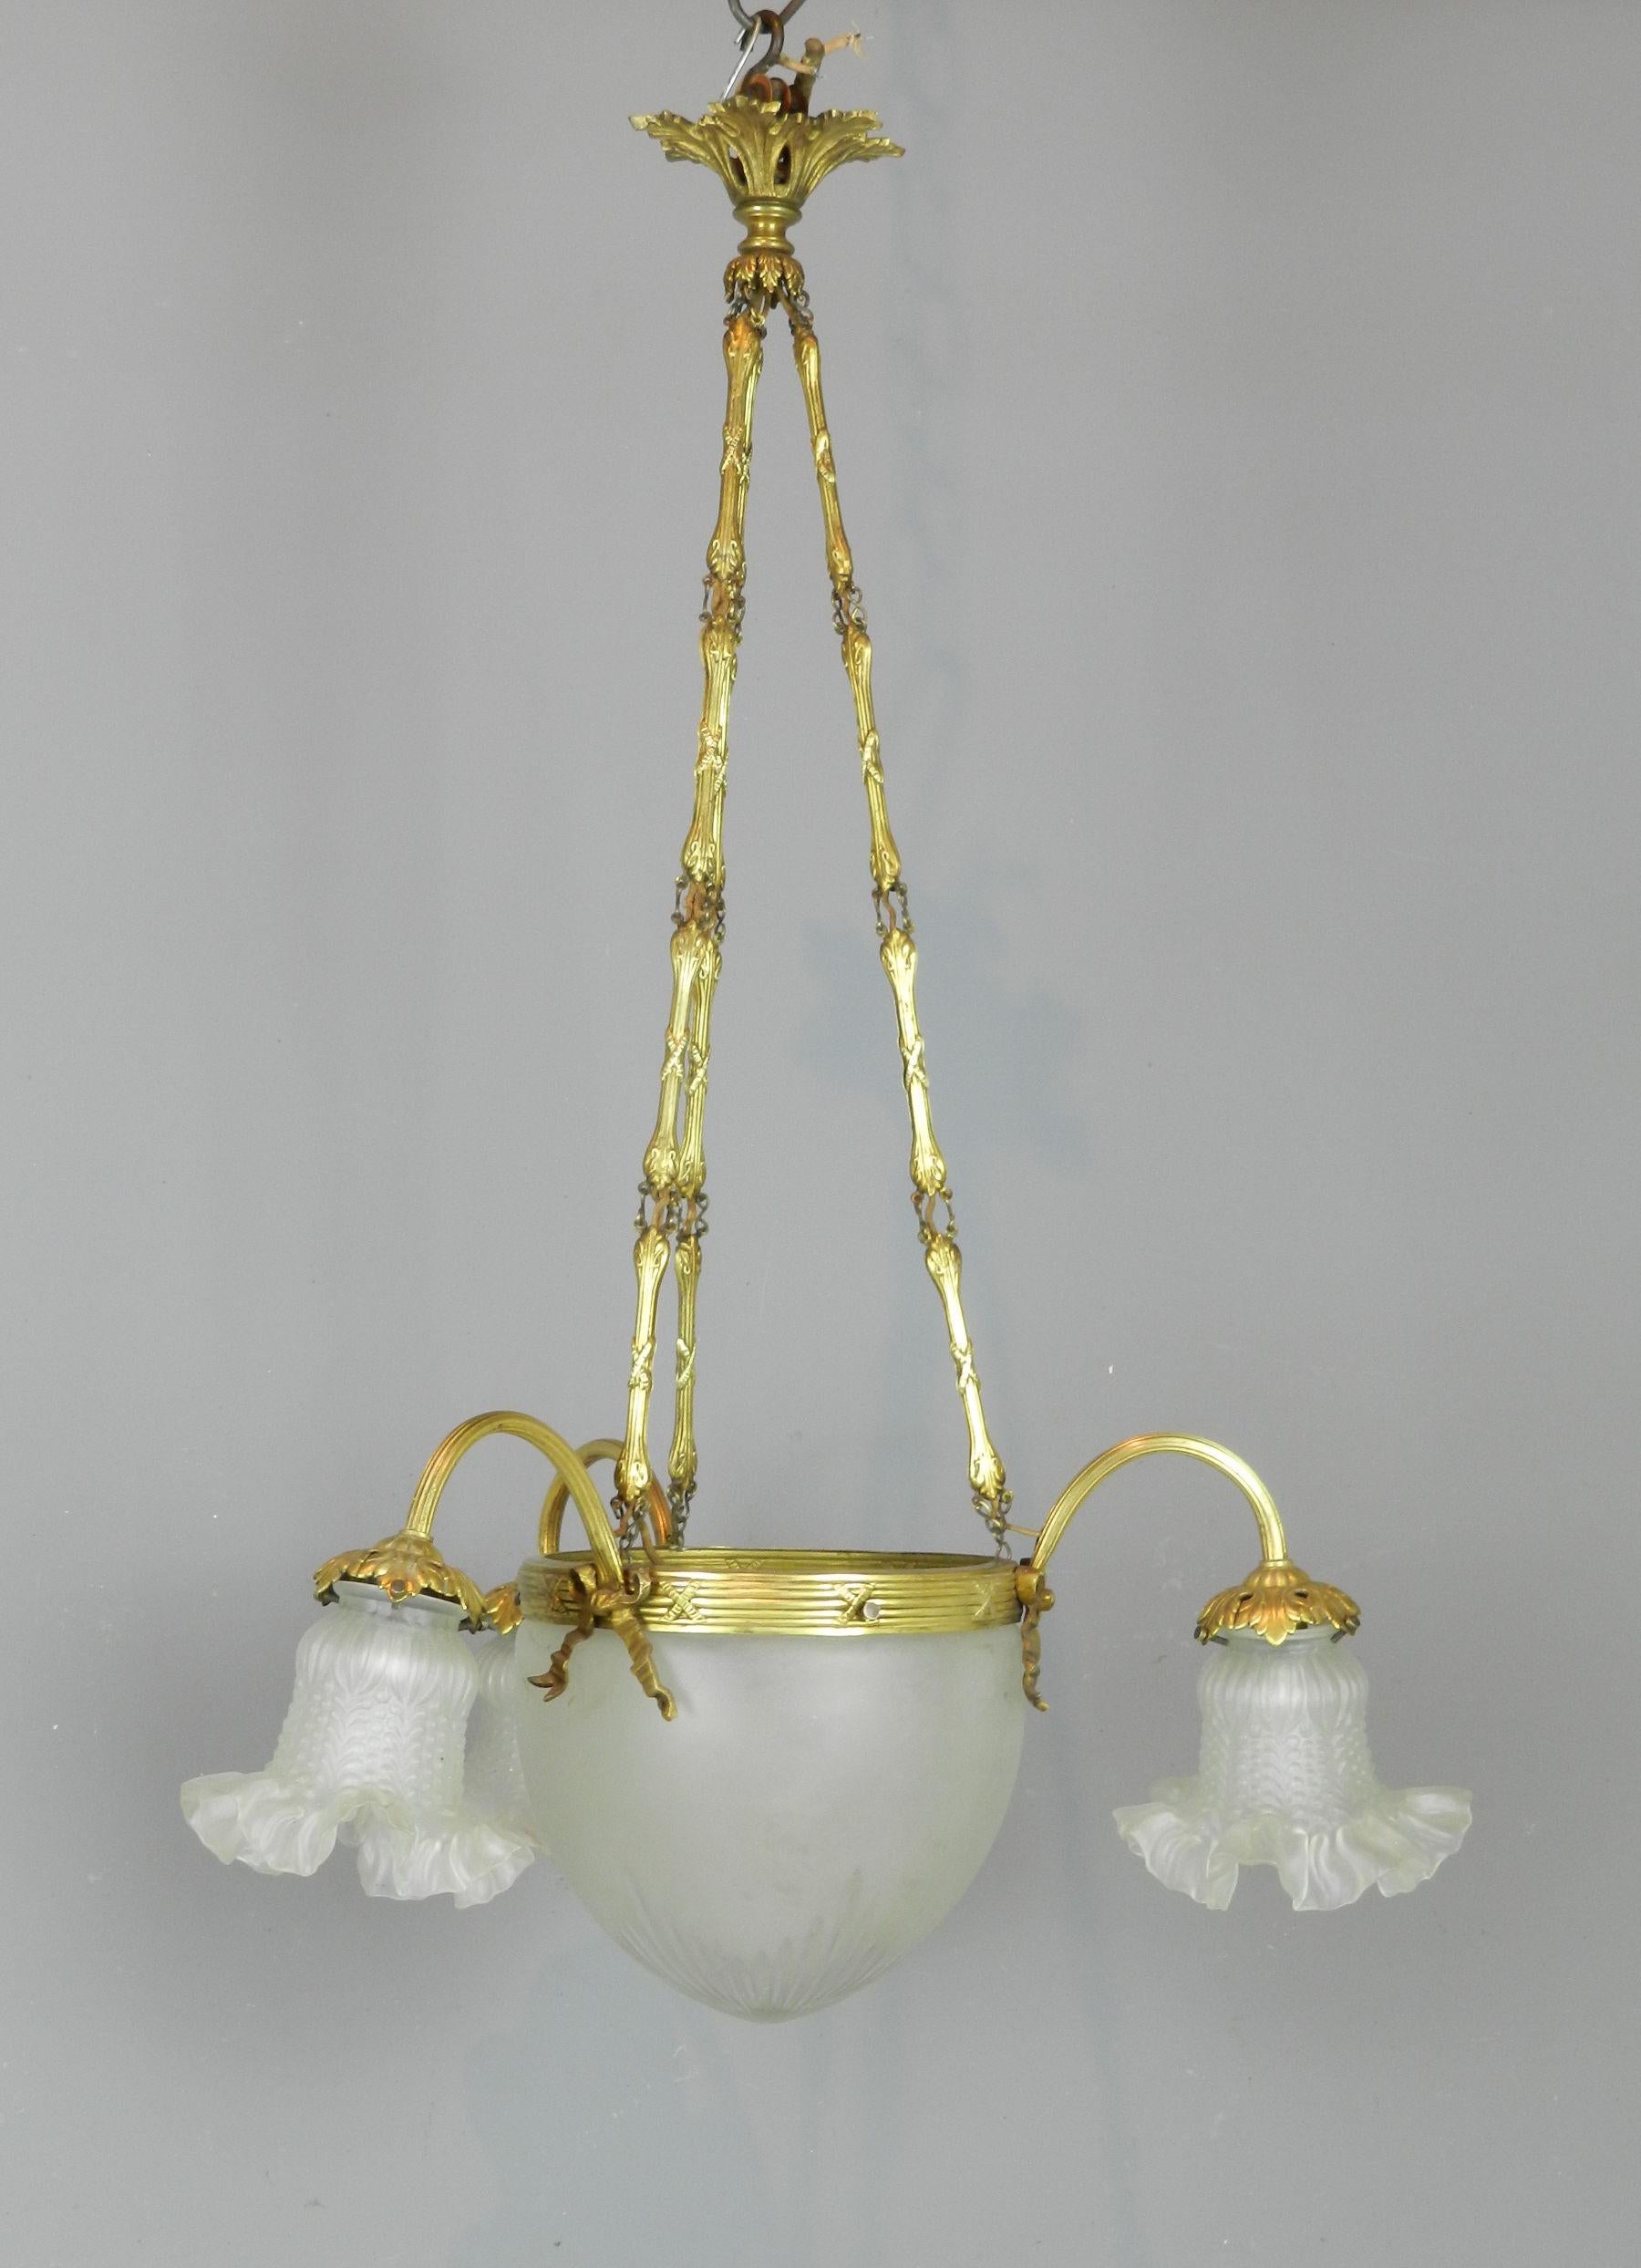 An impressive 1930s French three arm ceiling light with a frosted and cut glass bowl held within a brass retaining ring decorated with bows.

Issuing from the ring are three reeded foliate tulip holders. This all hangs from three decorative brass